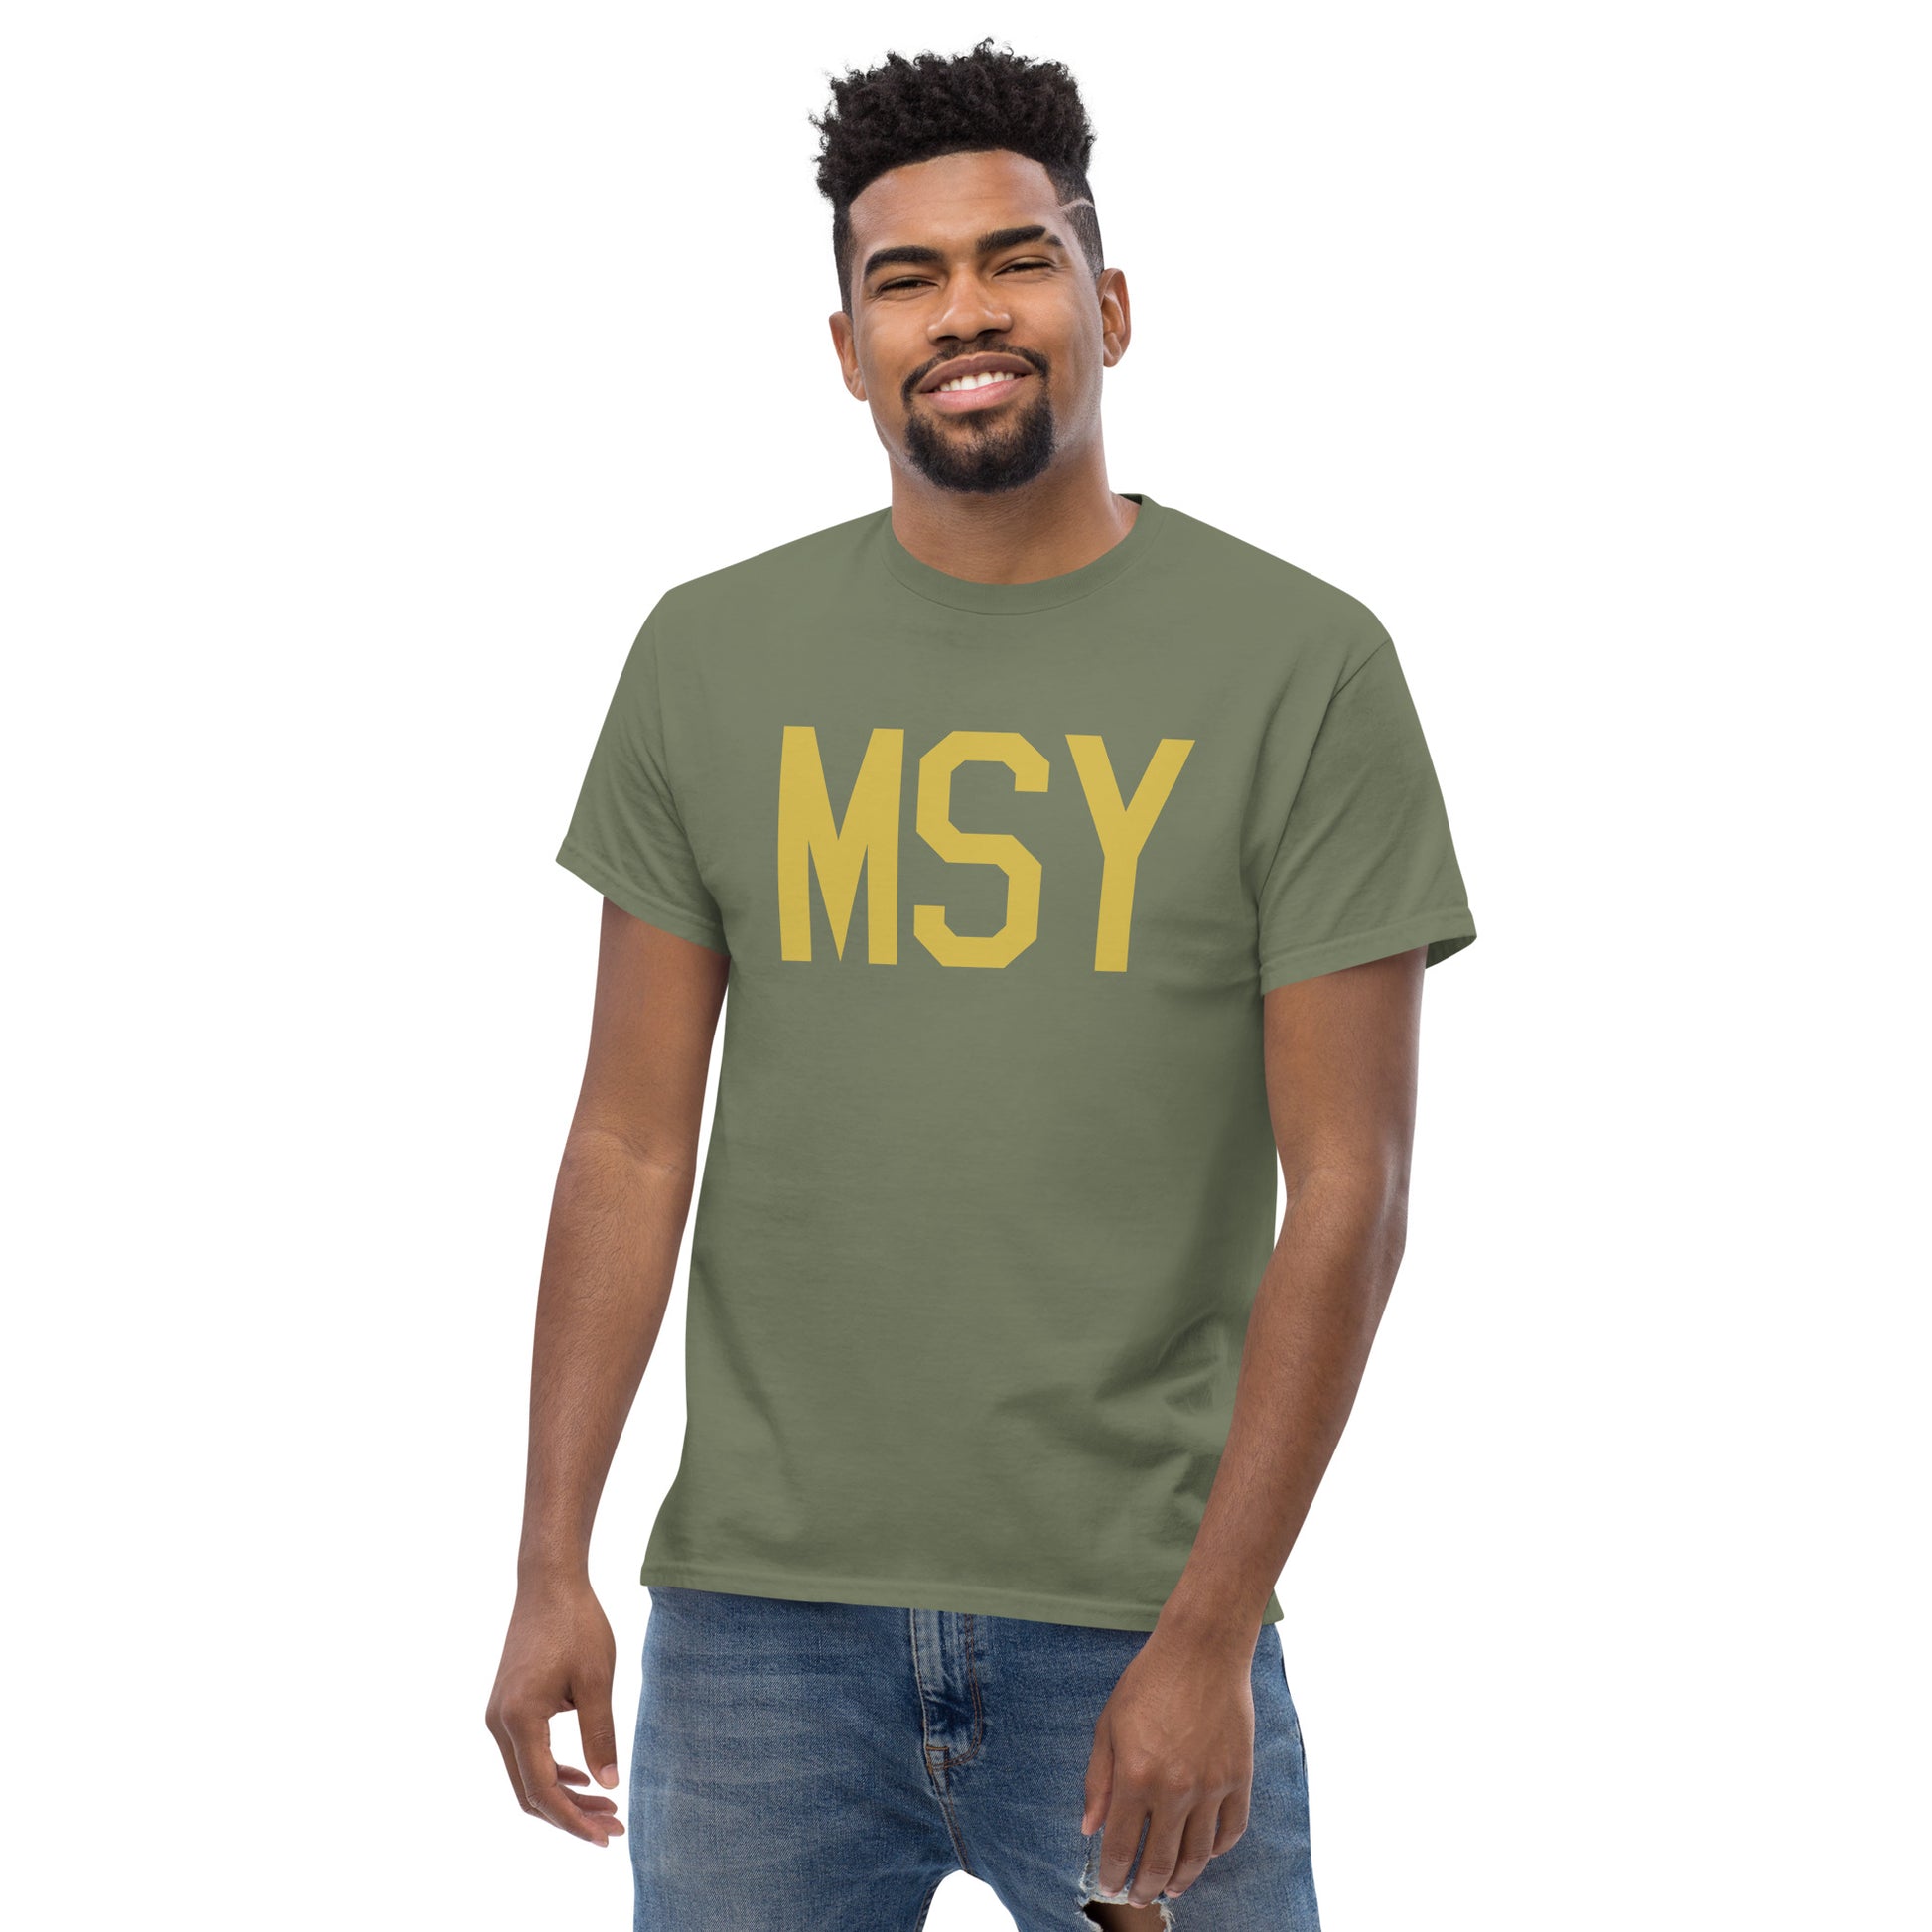 Aviation Enthusiast Men's Tee - Old Gold Graphic • MSY New Orleans • YHM Designs - Image 06